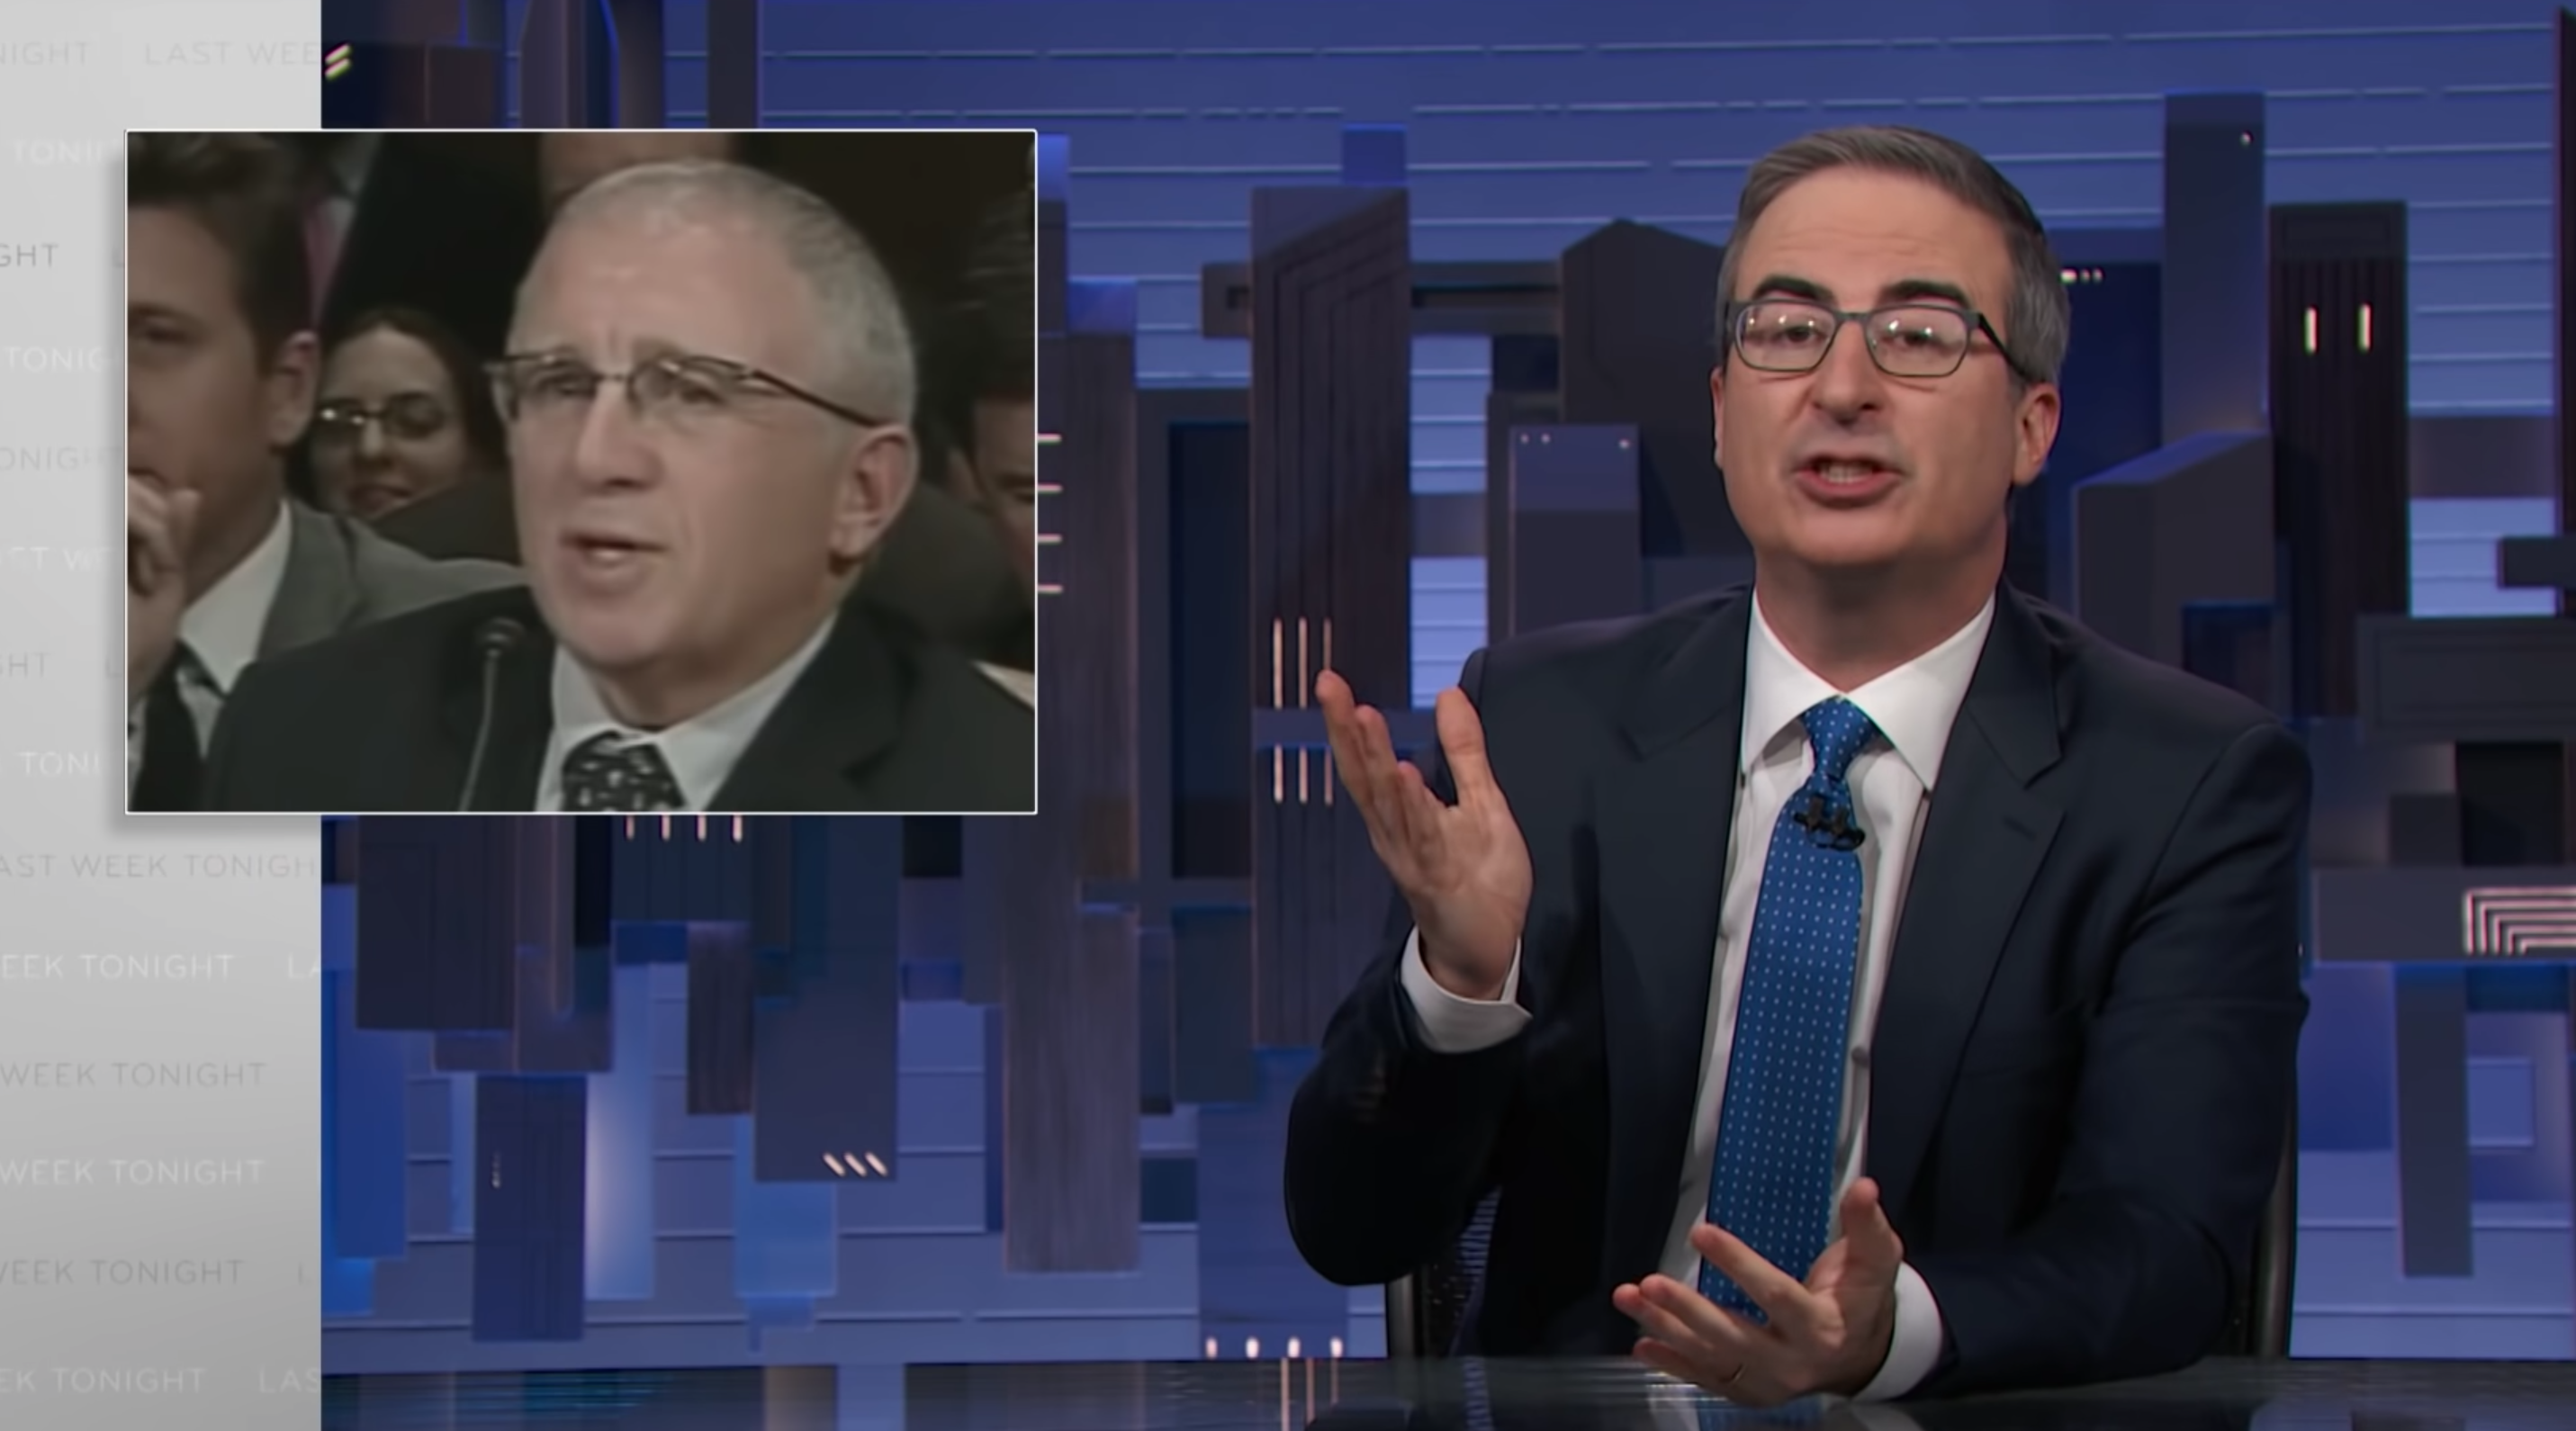 Watch John Oliver feature a clip of central Illinois native Irving Azoff on Last Week Tonight